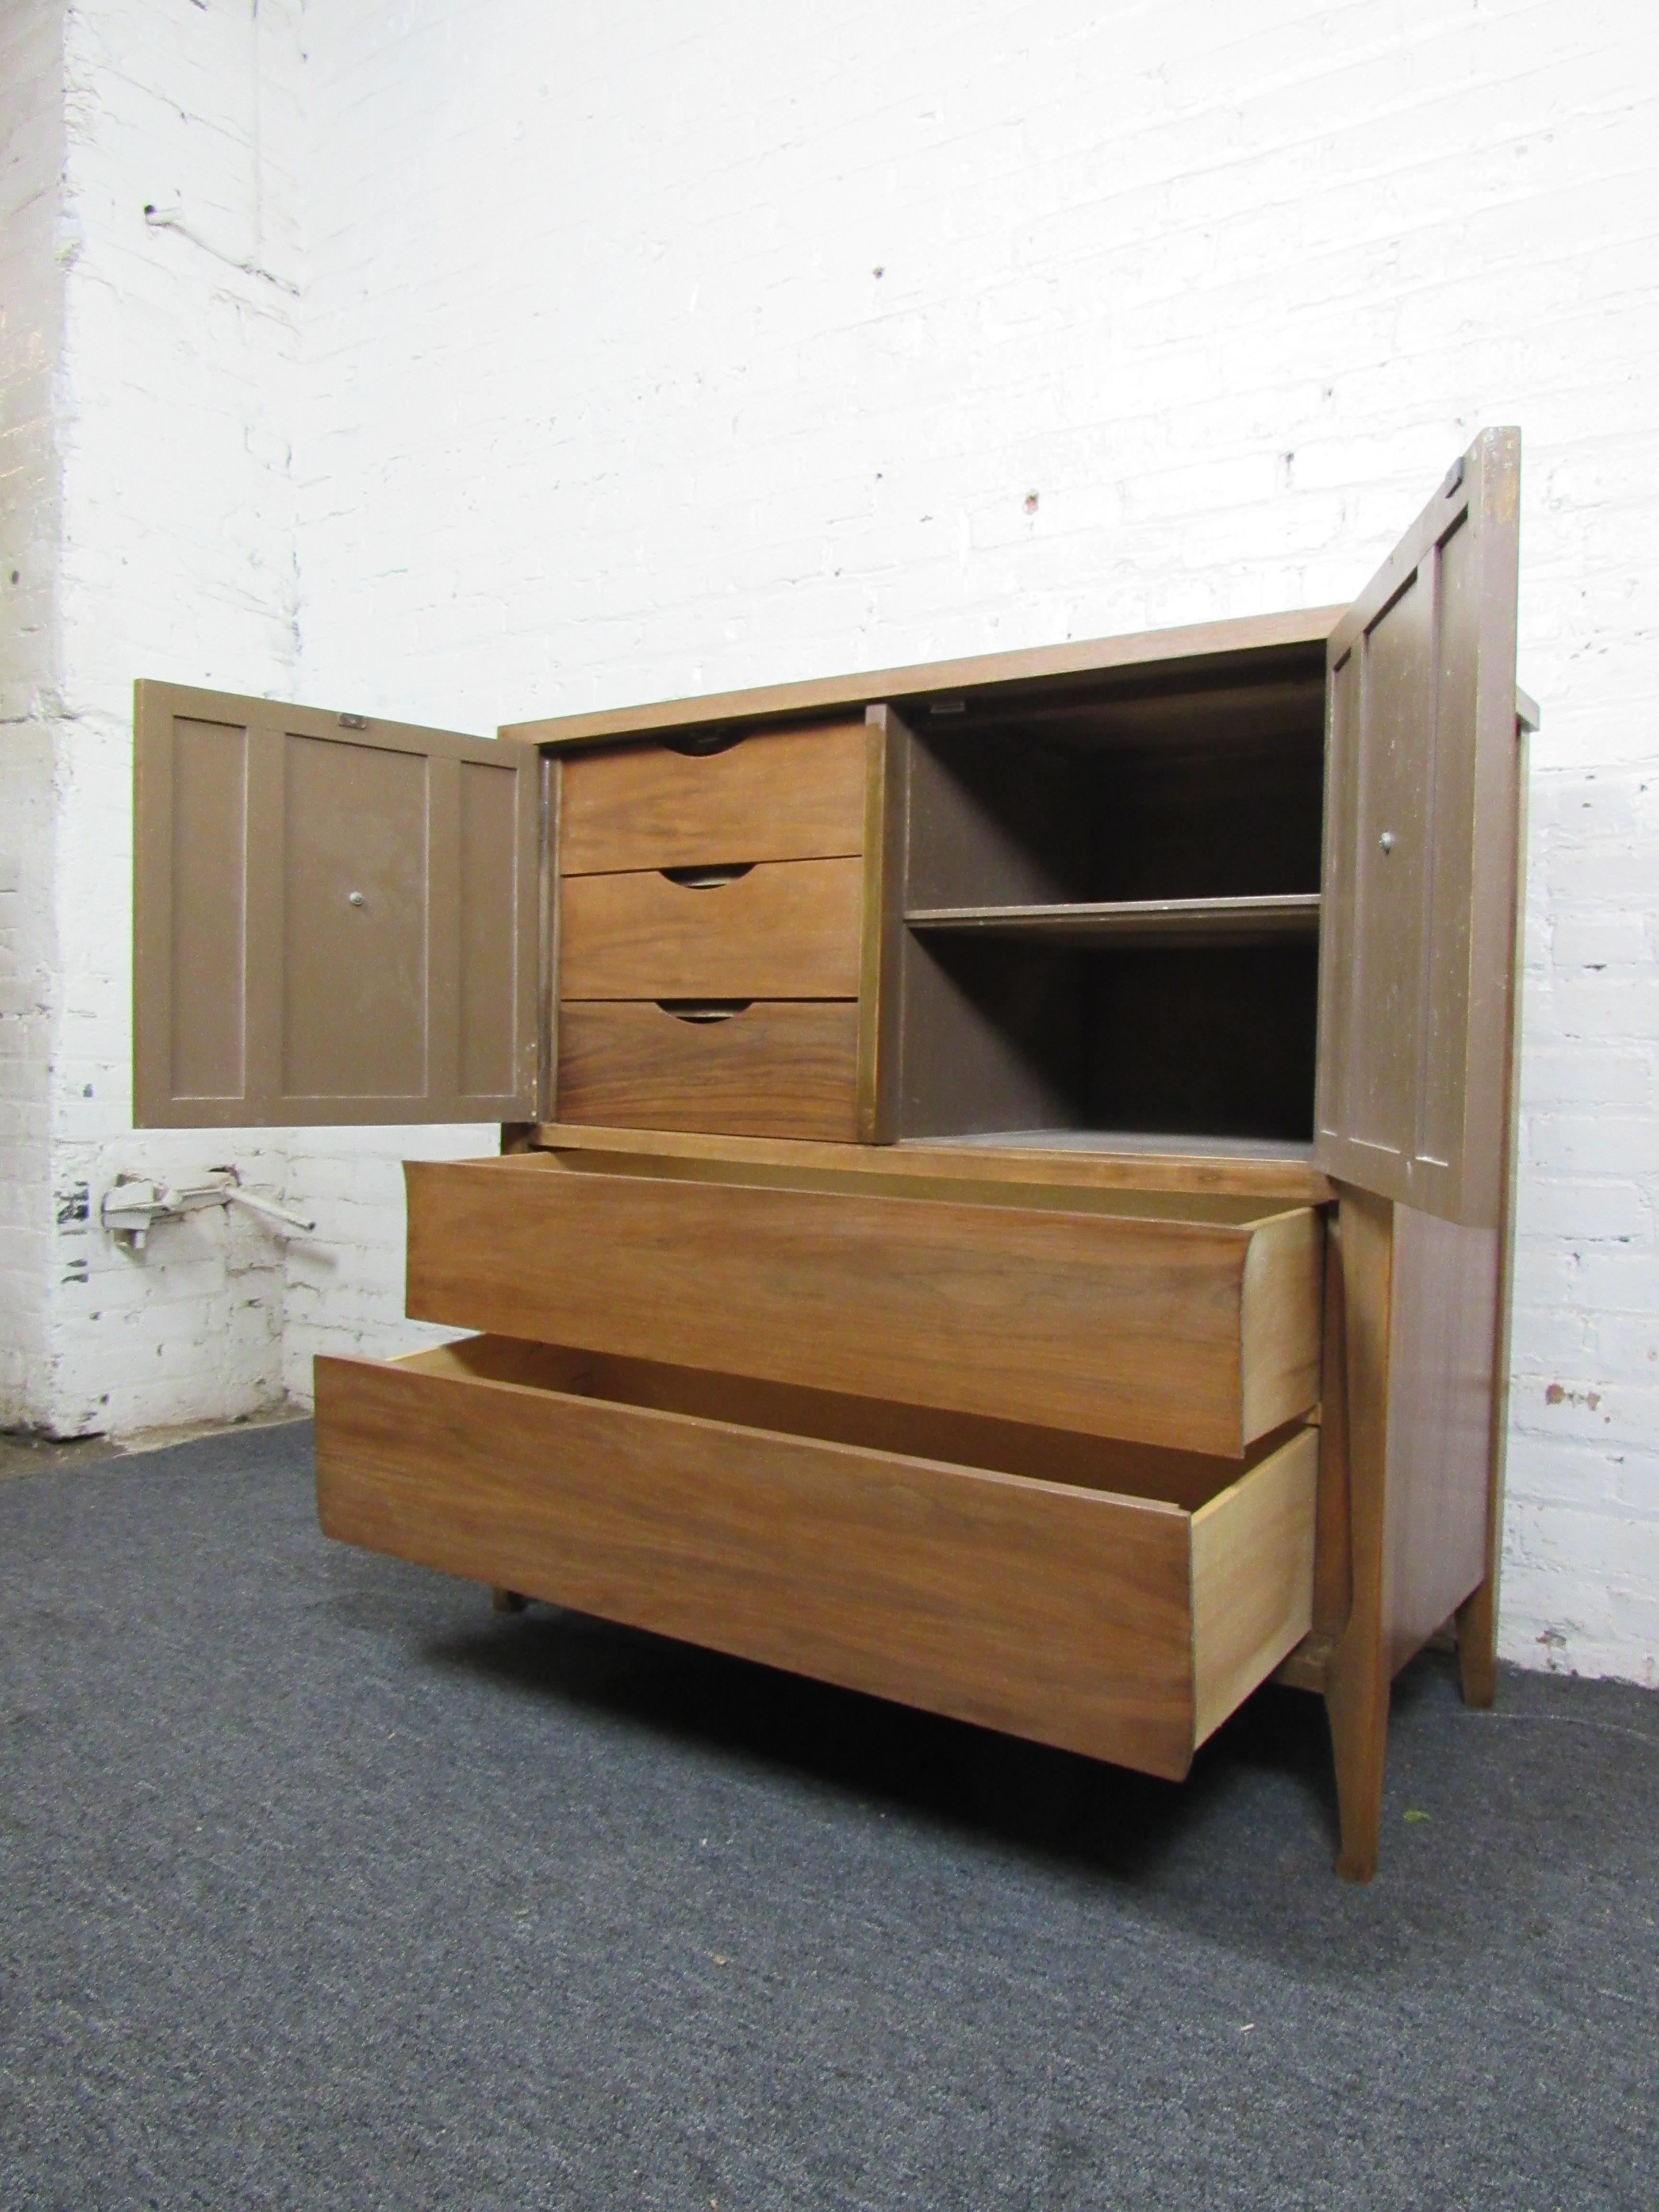 Nice mid-century dresser with wicker accent panels. Top doors open to reveal shelving and five slide-out drawers for plenty of storage options. Please confirm item location with seller (NY/NJ).